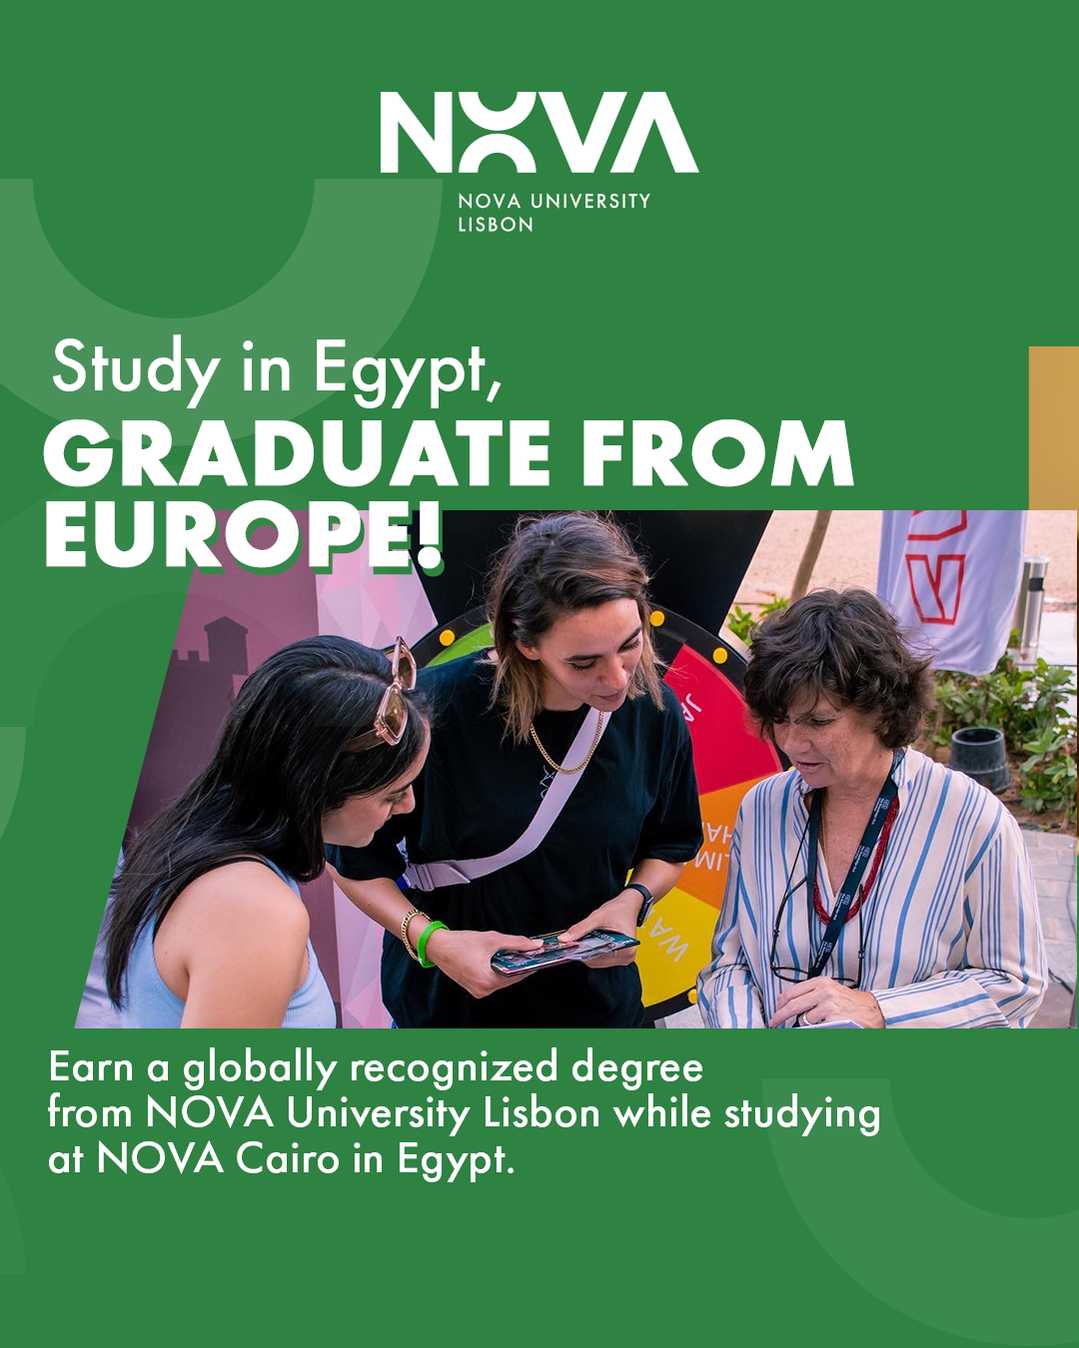 Study in Egypt, Graduate from Europe!